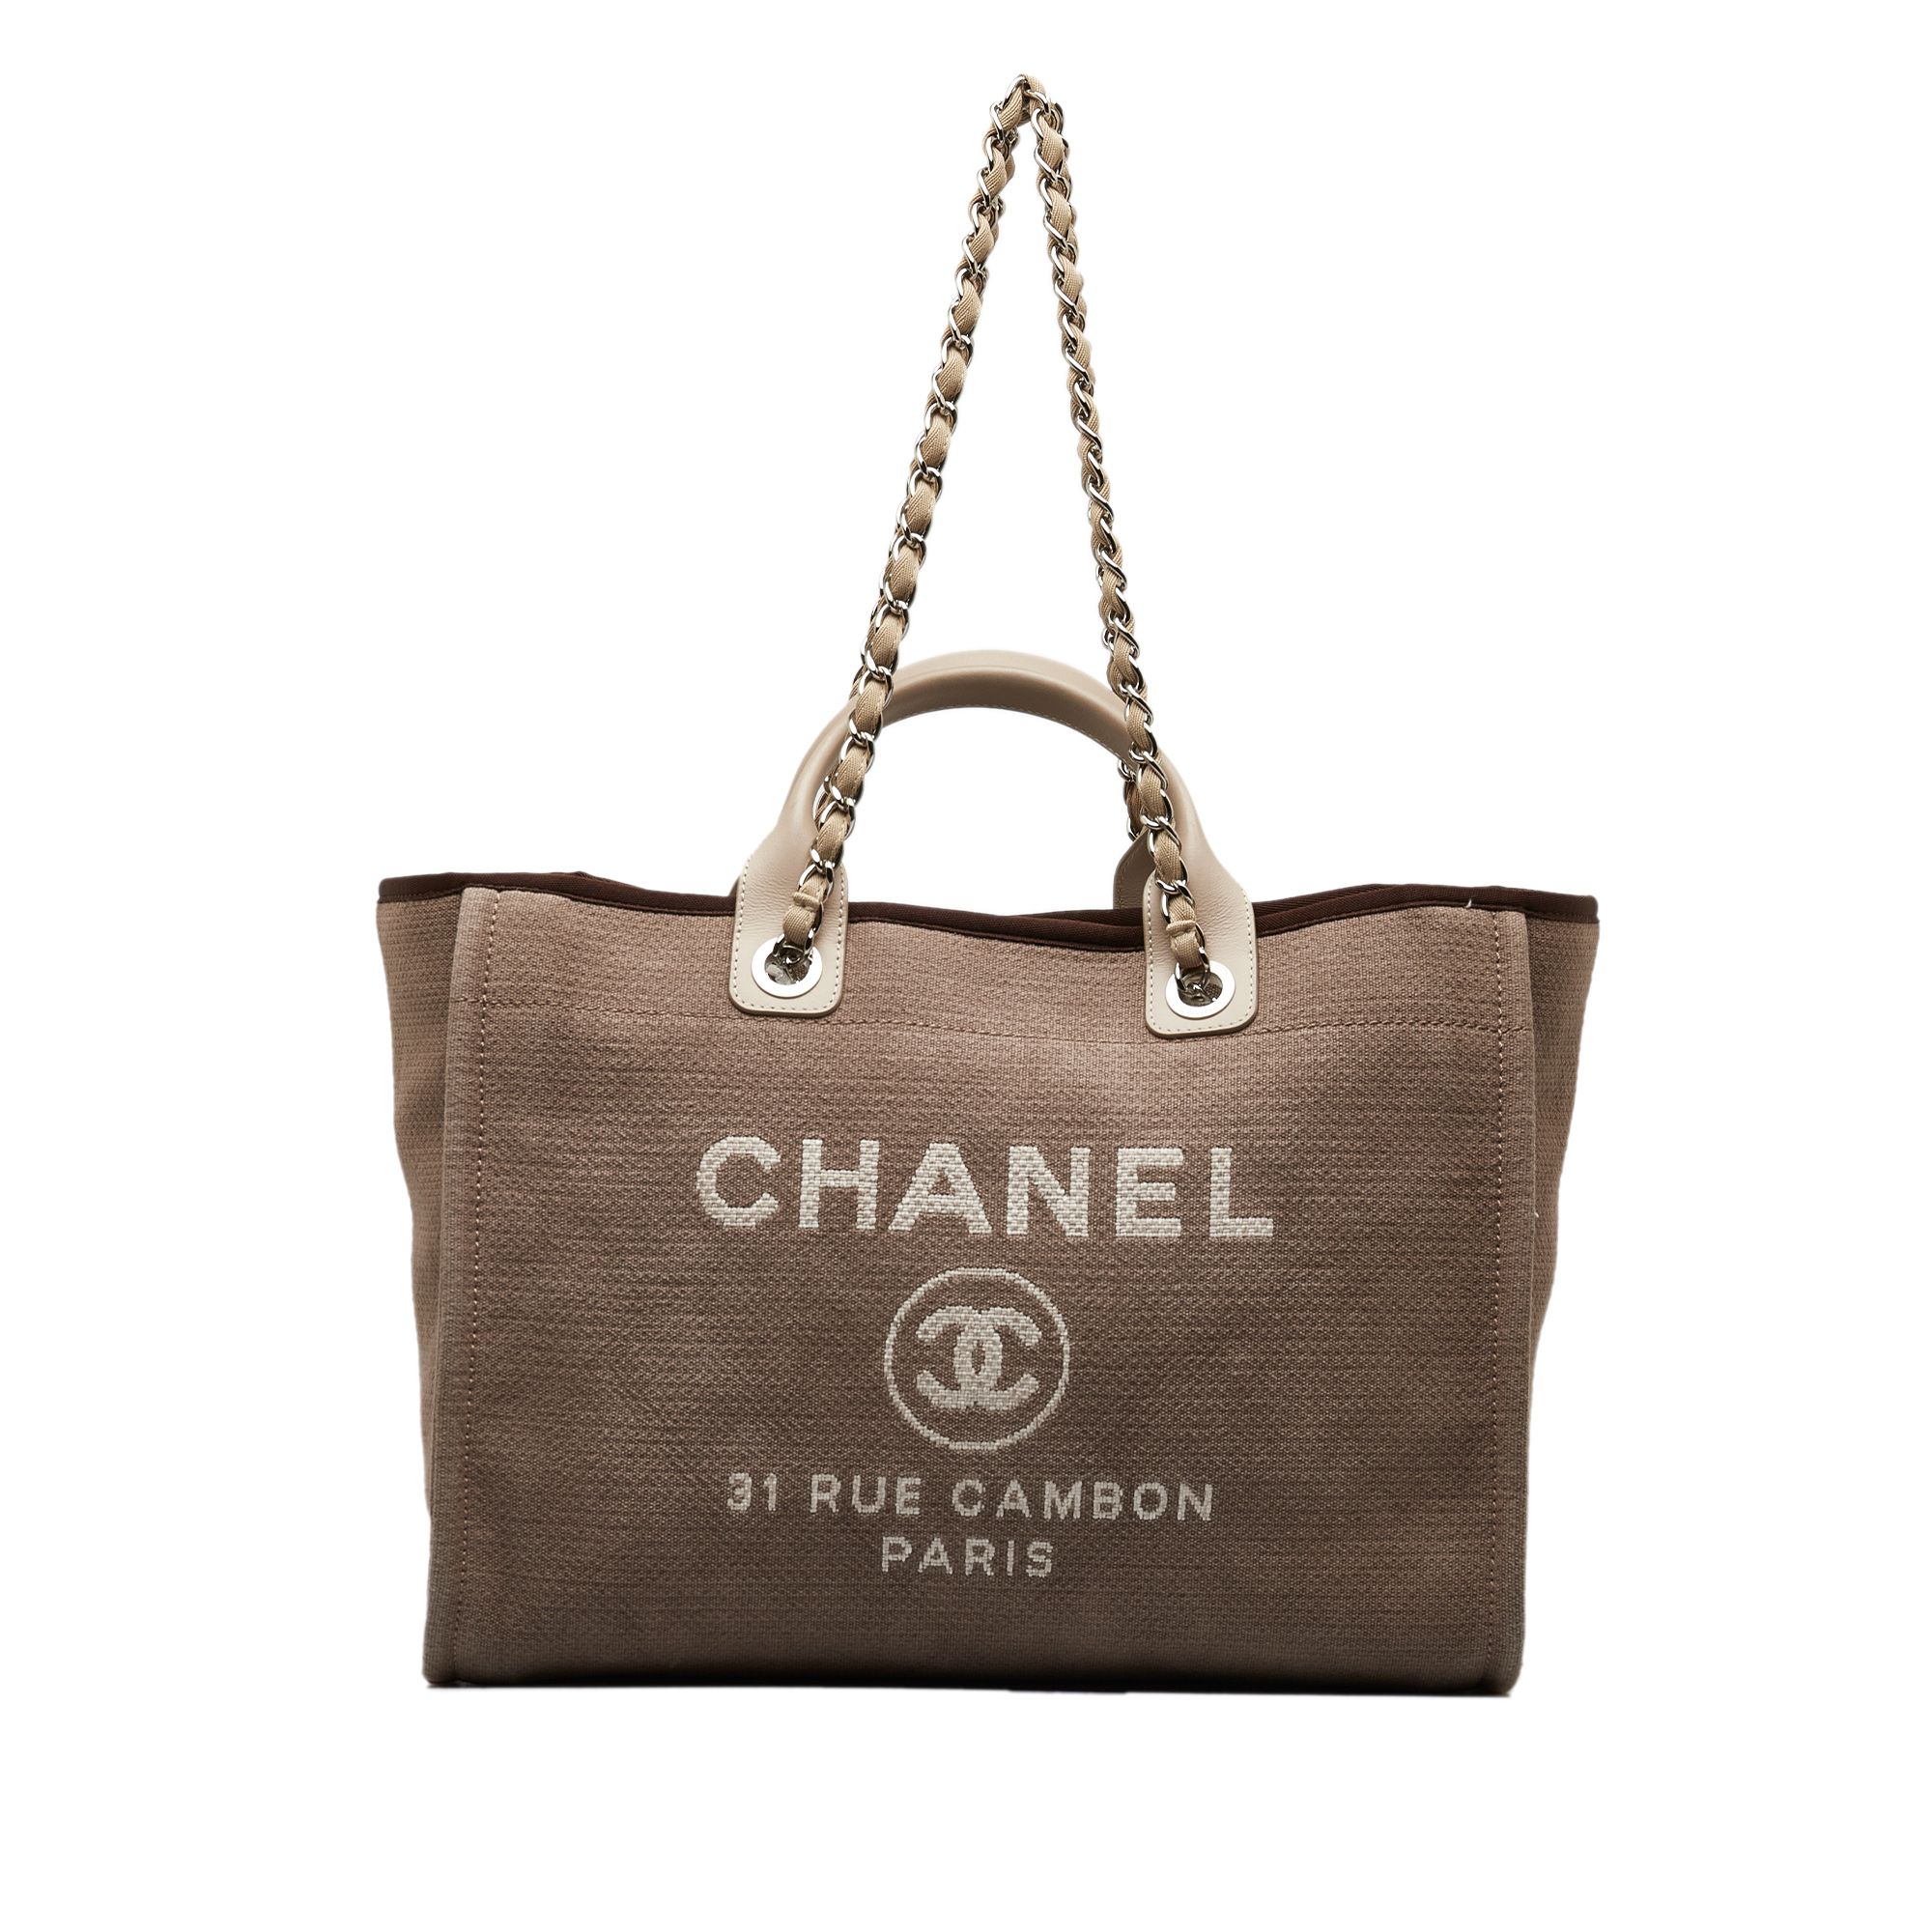 Chanel Chanel Large Deauville Shopping Tote